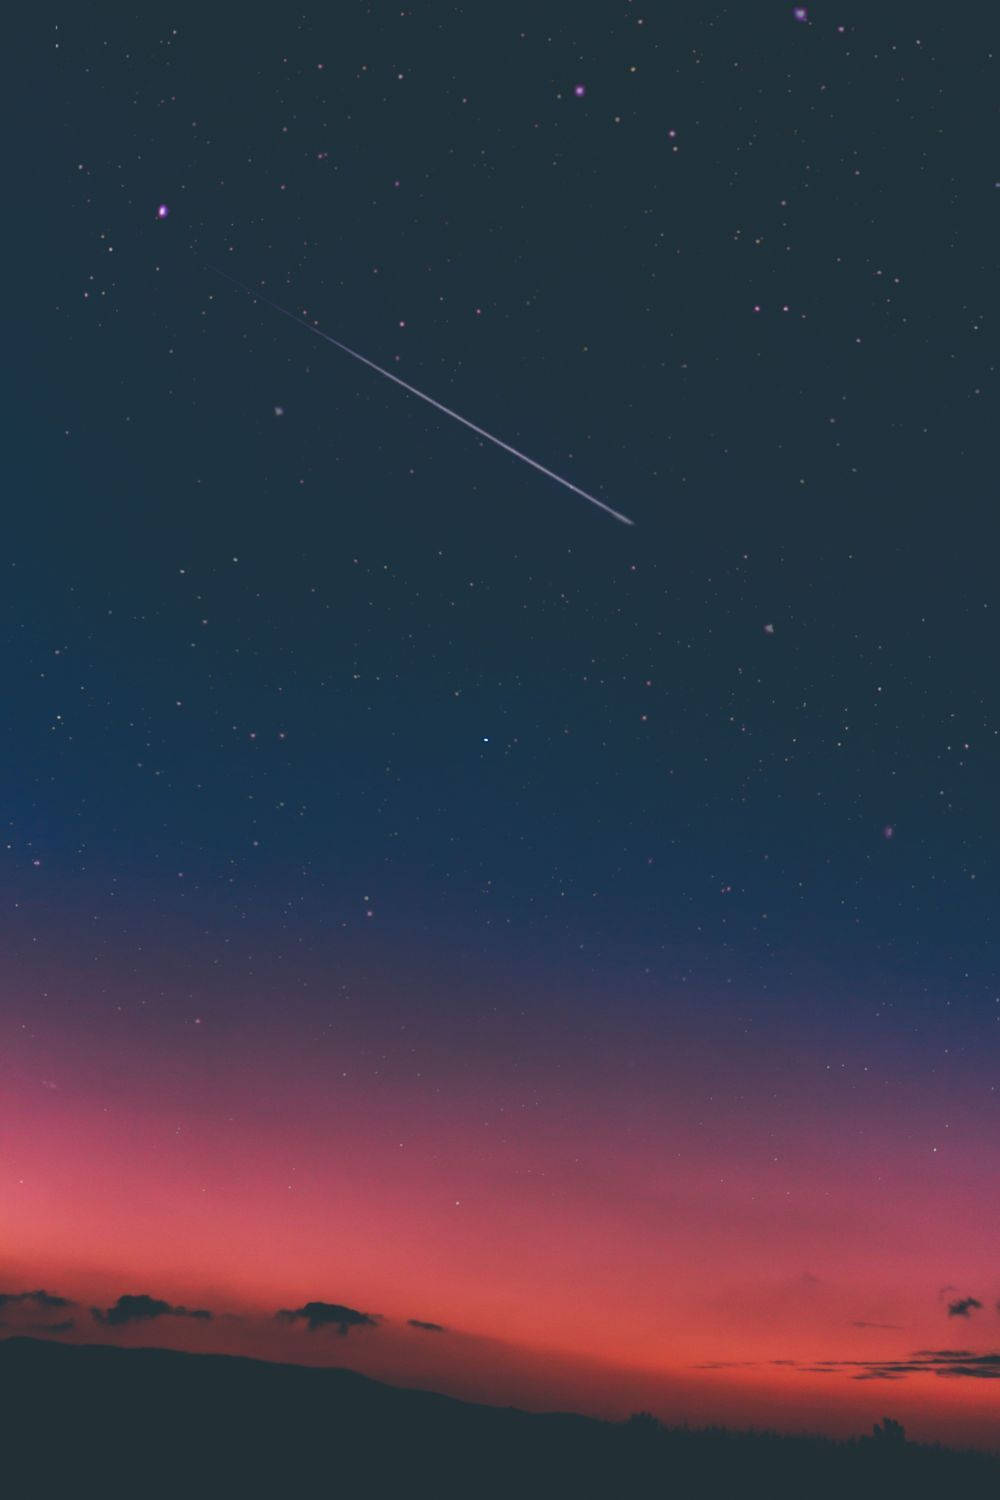 Aesthetic Night Sky With Shooting Stars Wallpaper